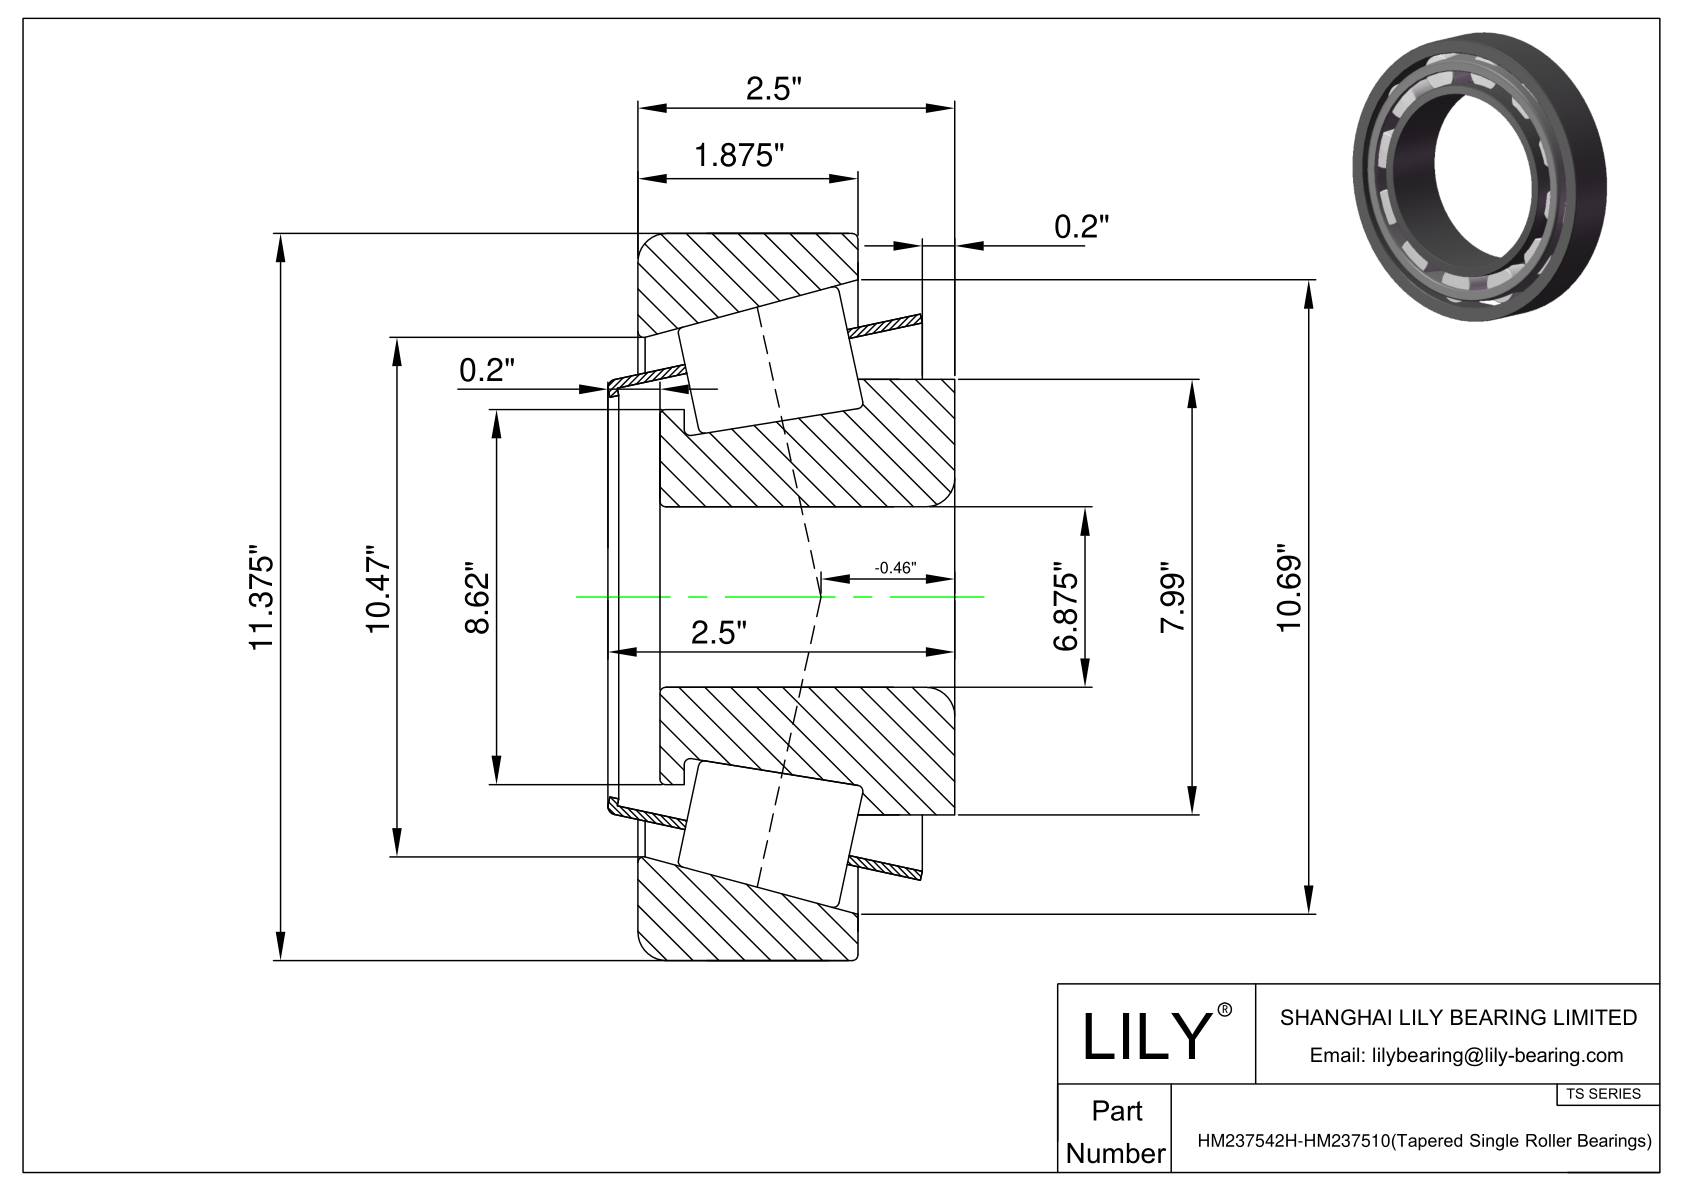 HM237542H-HM237510 TS (Tapered Single Roller Bearings) (Imperial) cad drawing